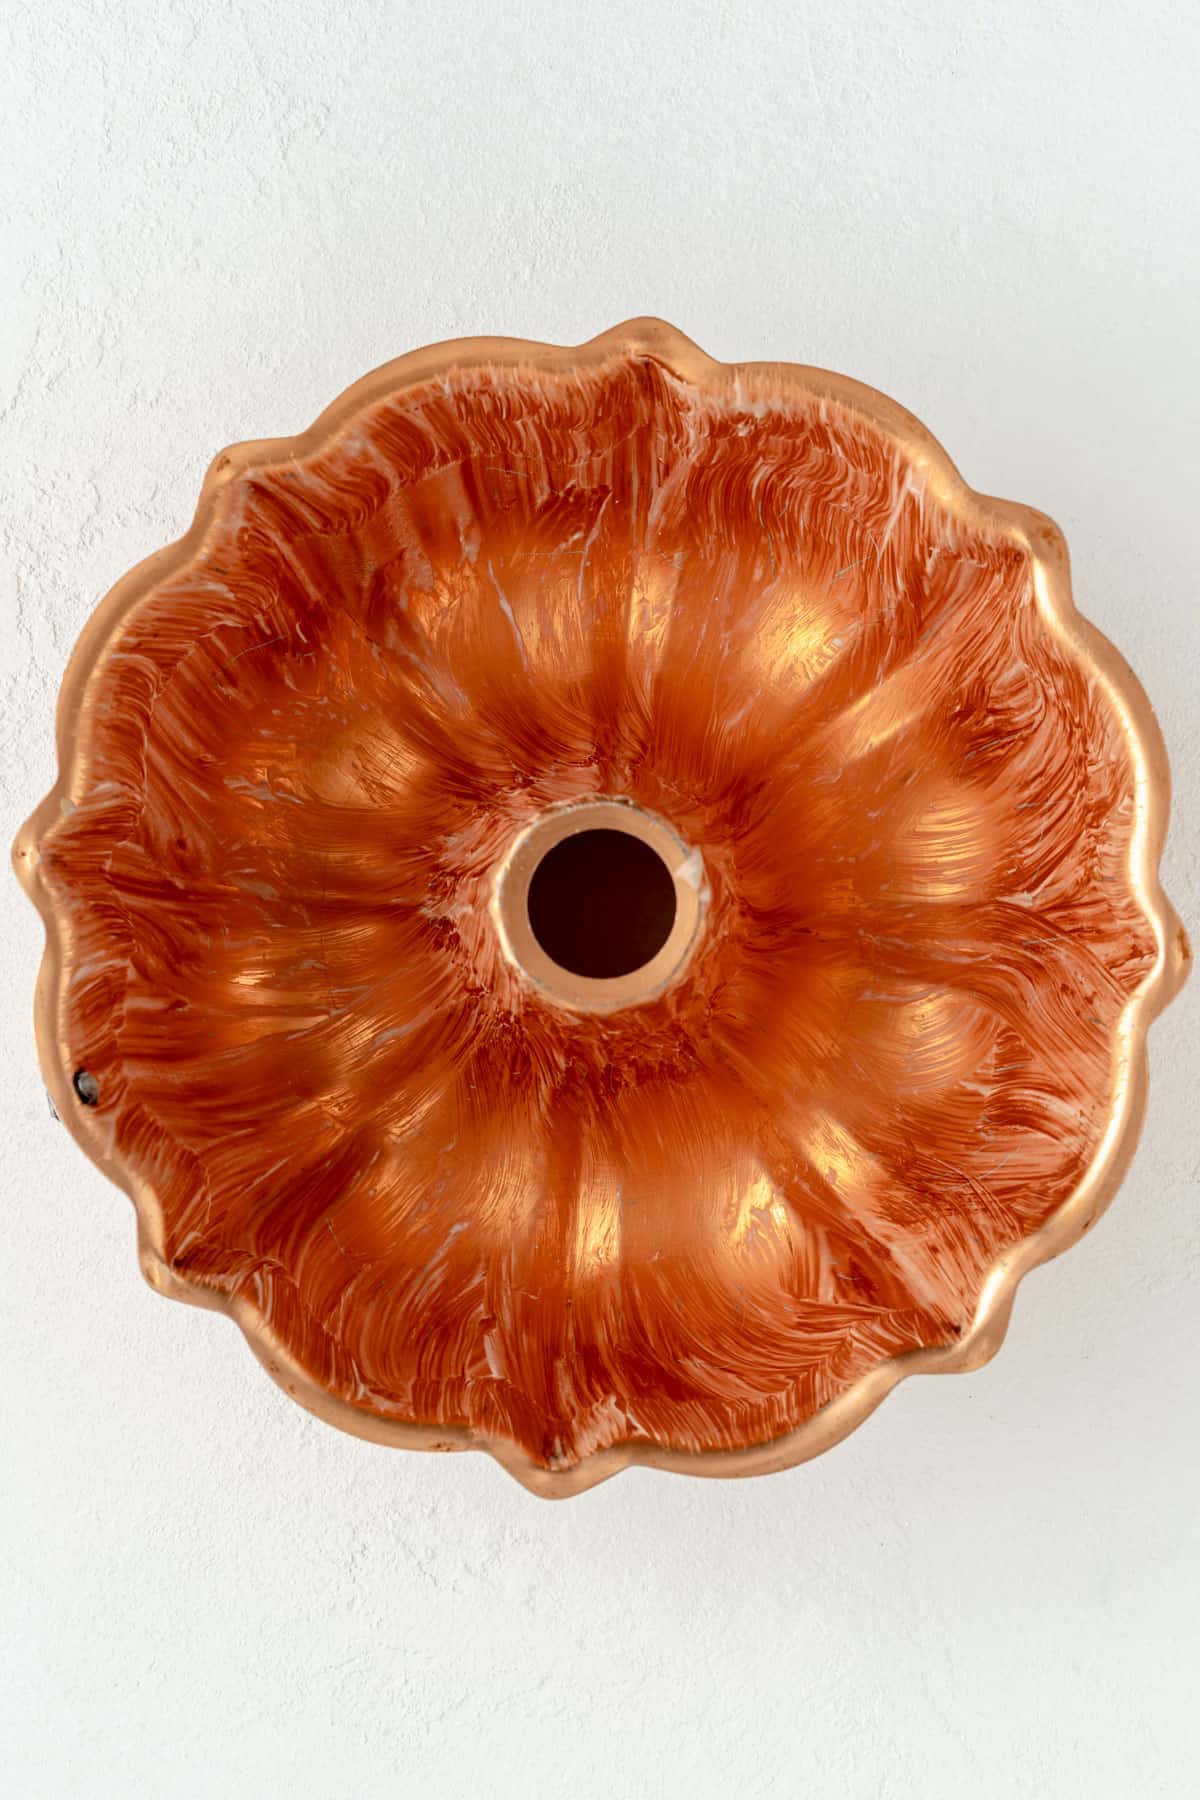 Copper Bundt pan brushed with melted butter on a white background.